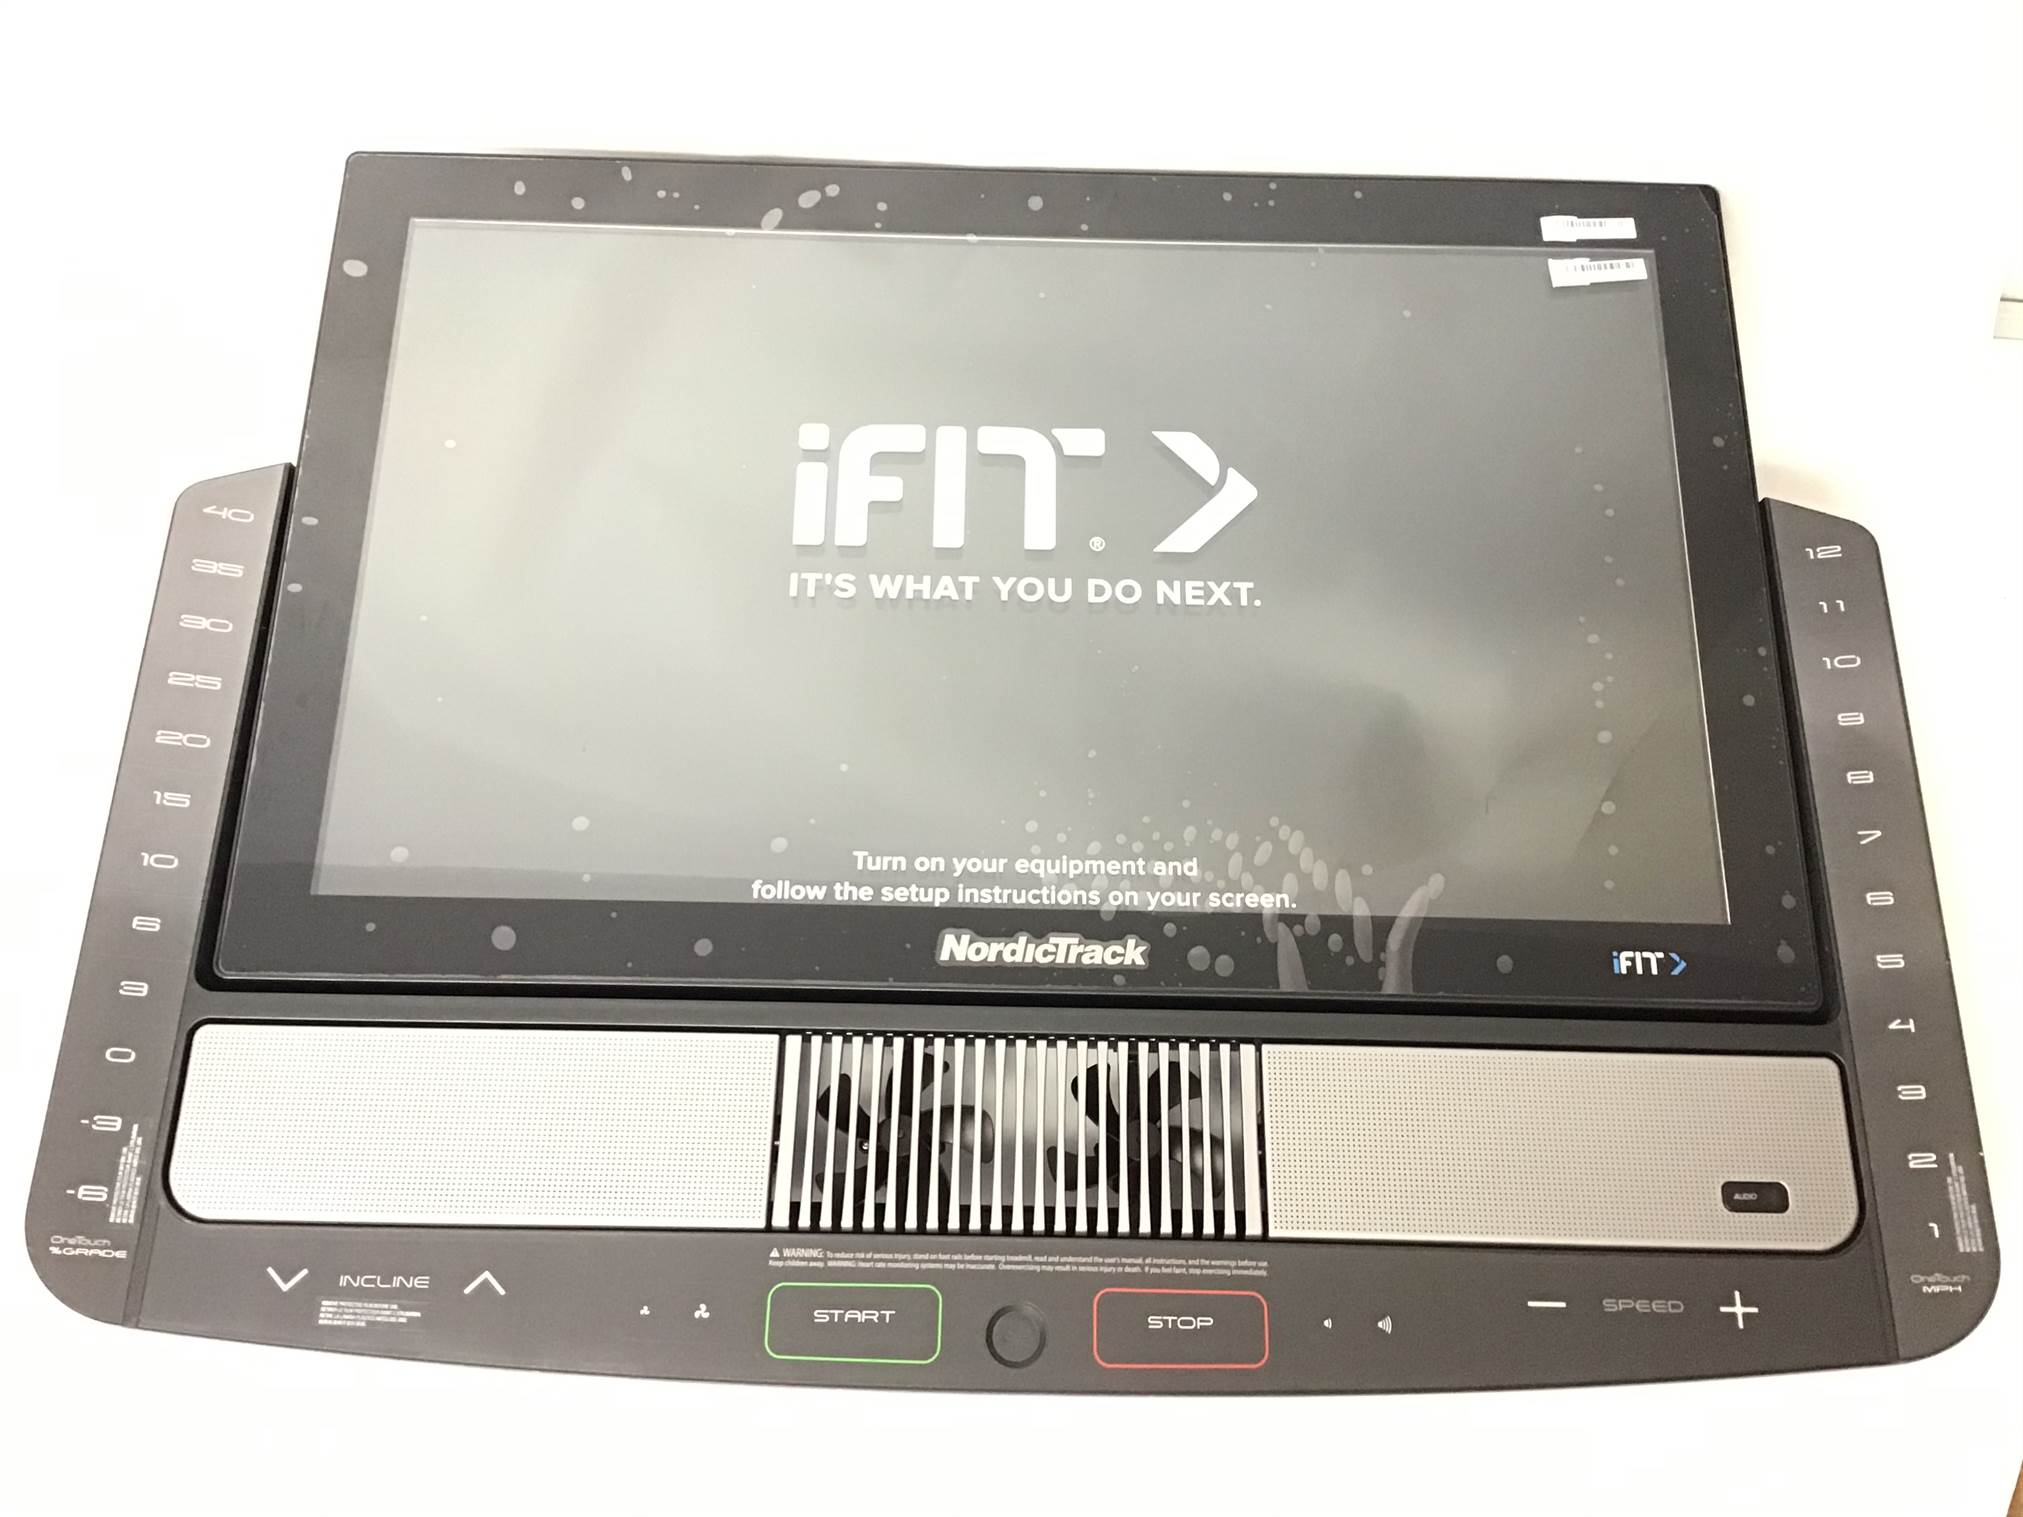 Display Console ETNT39019